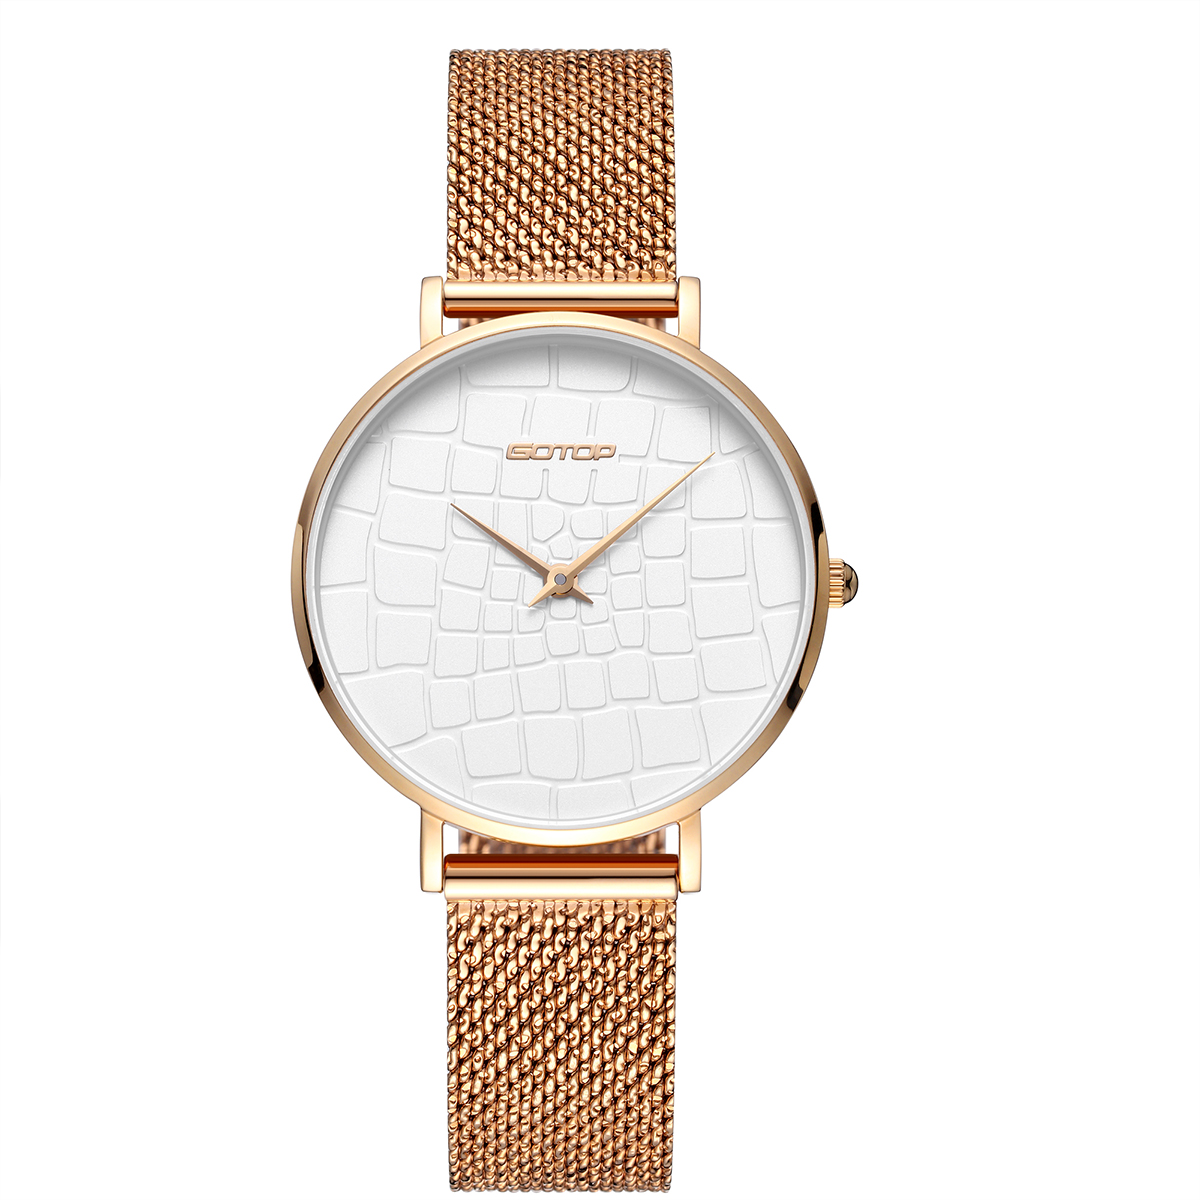 FEATURES OF SS550 SLIM CASE MESH STRAP WOMEN'S WATCH